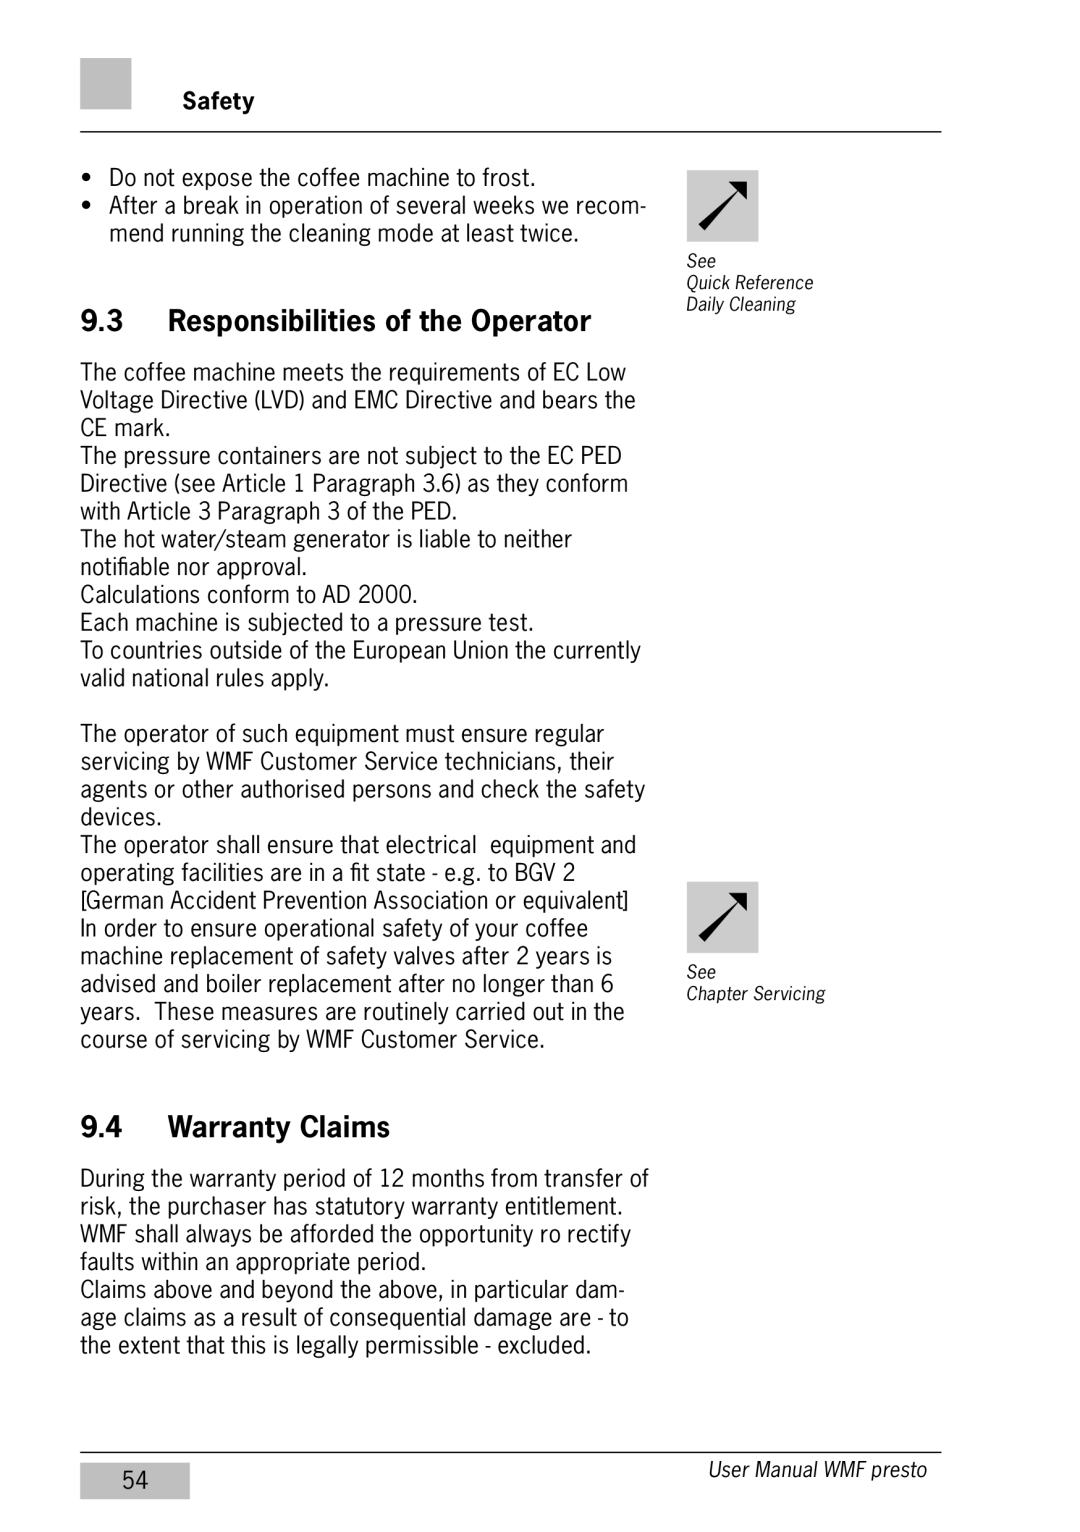 WMF Americas 1400 user manual Responsibilities of the Operator, Warranty Claims, Safety 